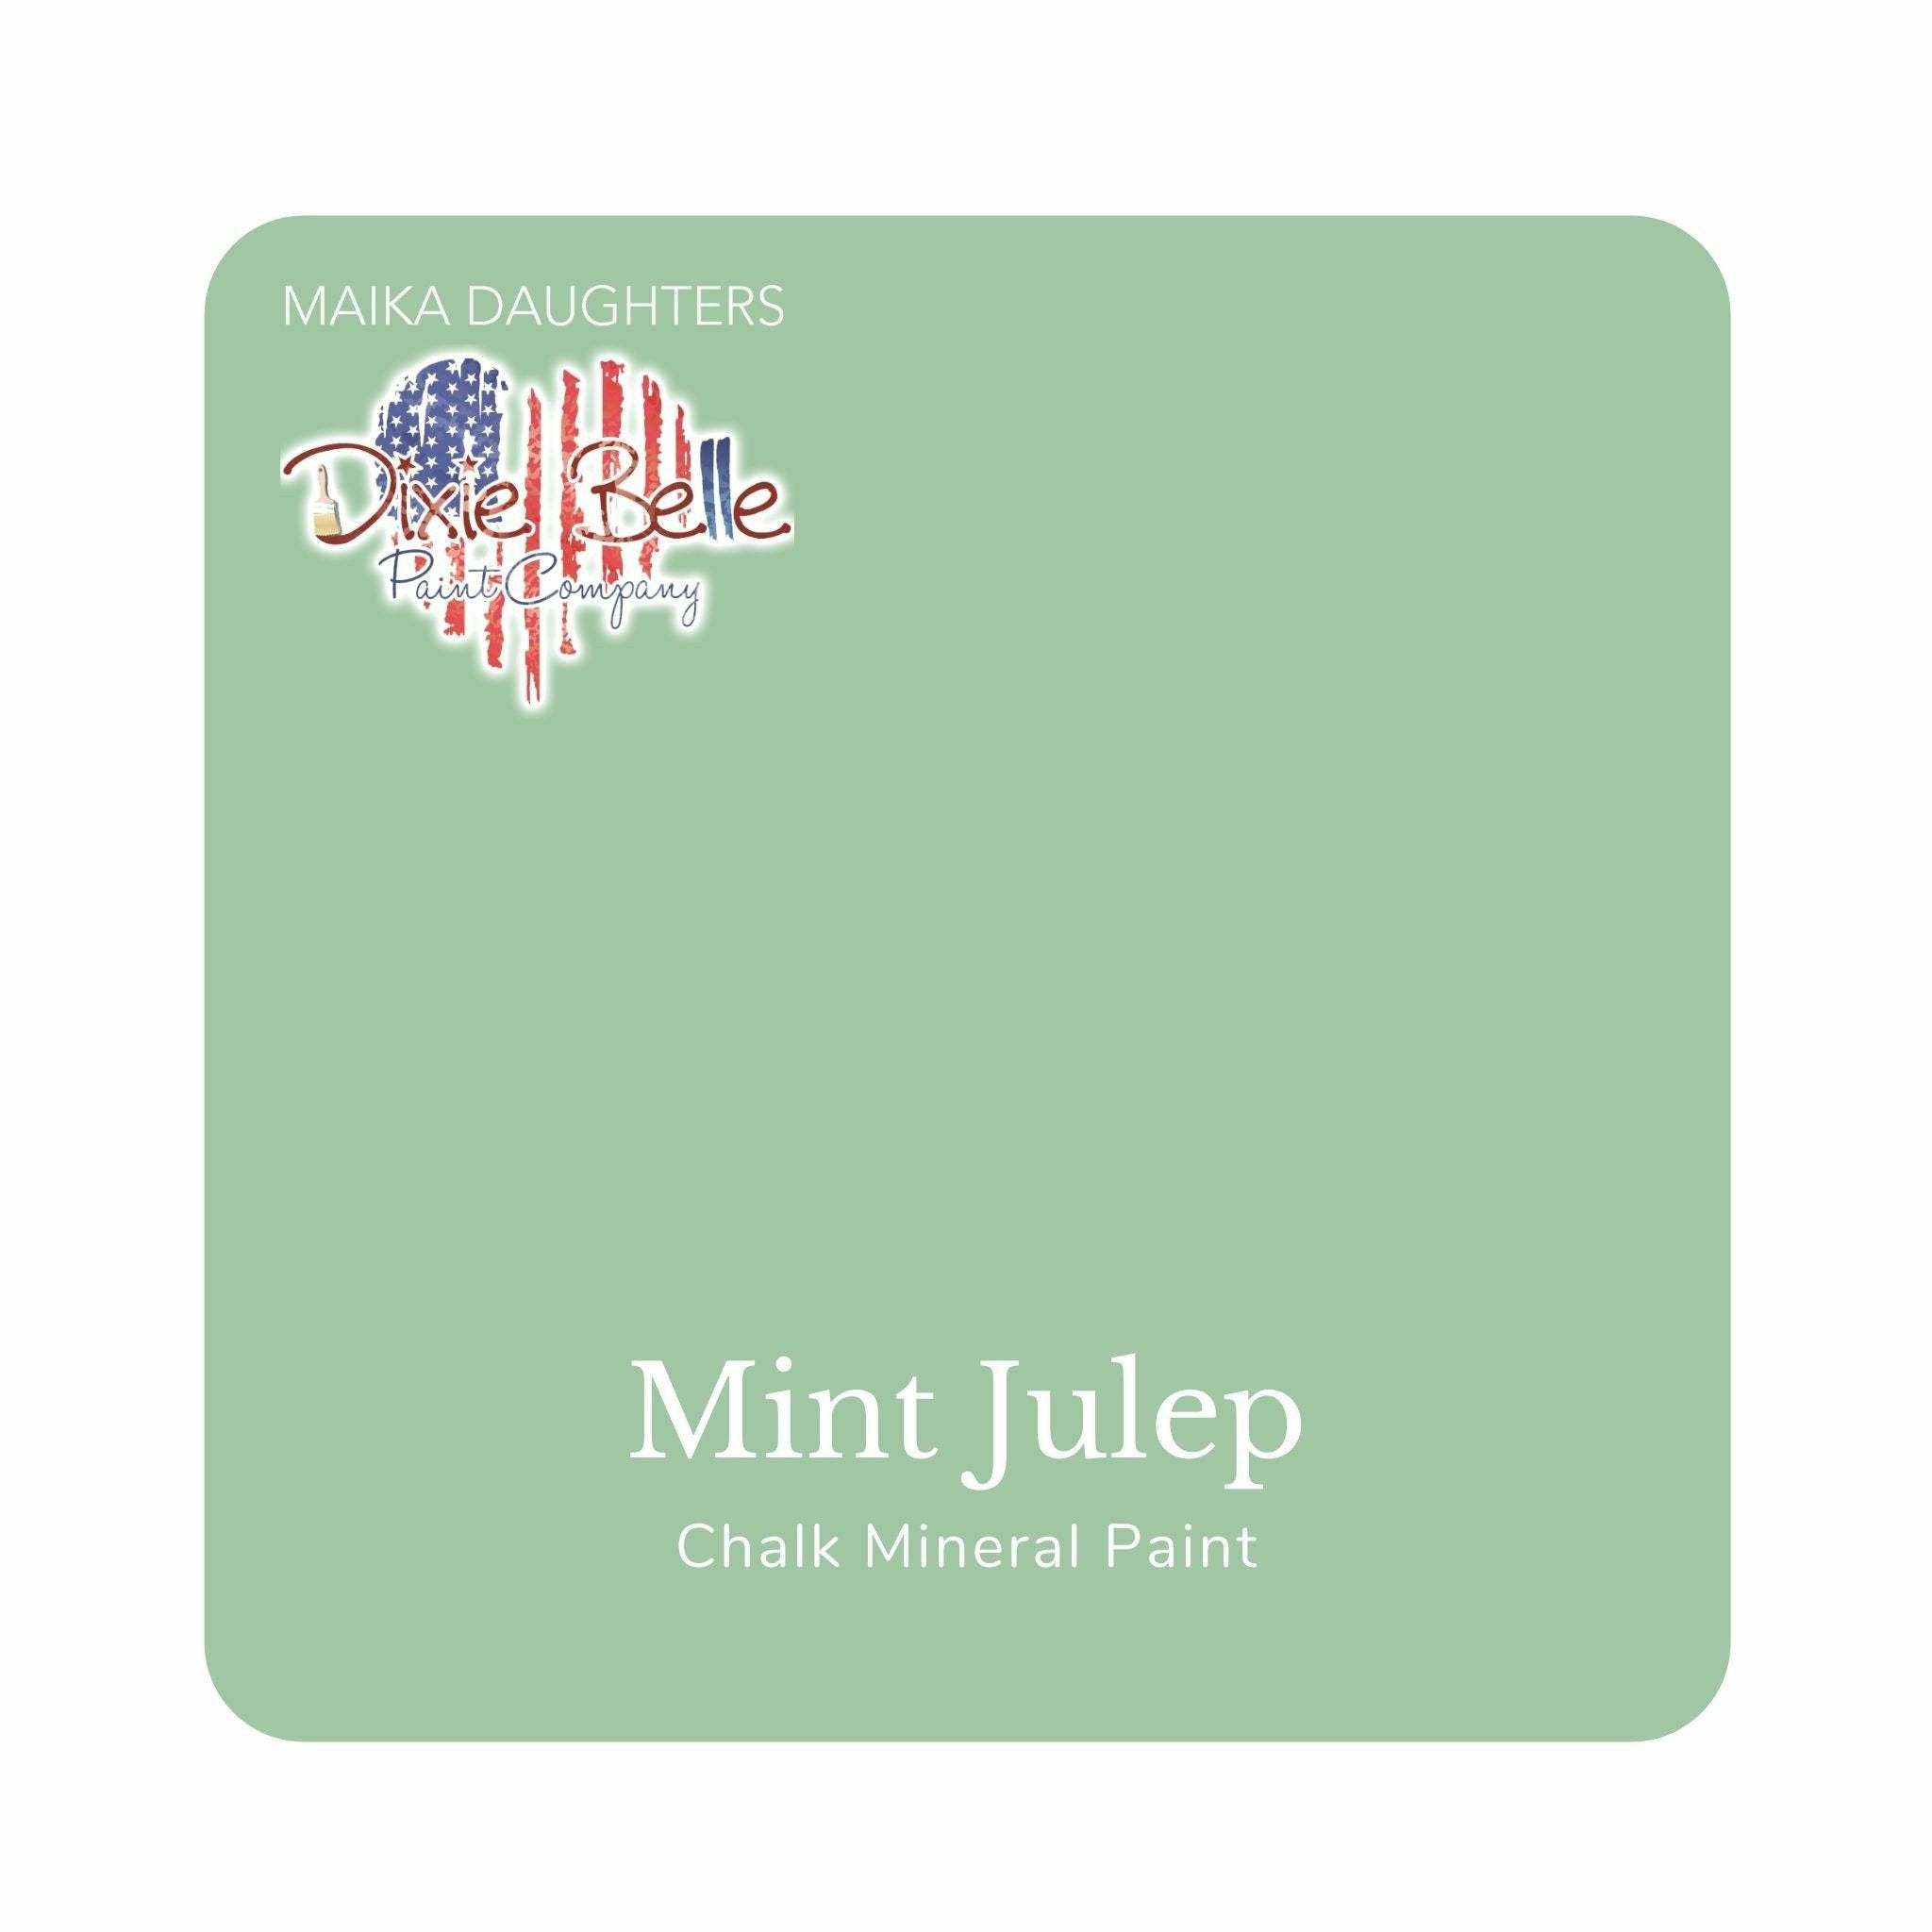 A square swatch card of Dixie Belle Paint Company’s Mint Julep Chalk Mineral Paint is against a white background. This color is a light green with gray untertones.